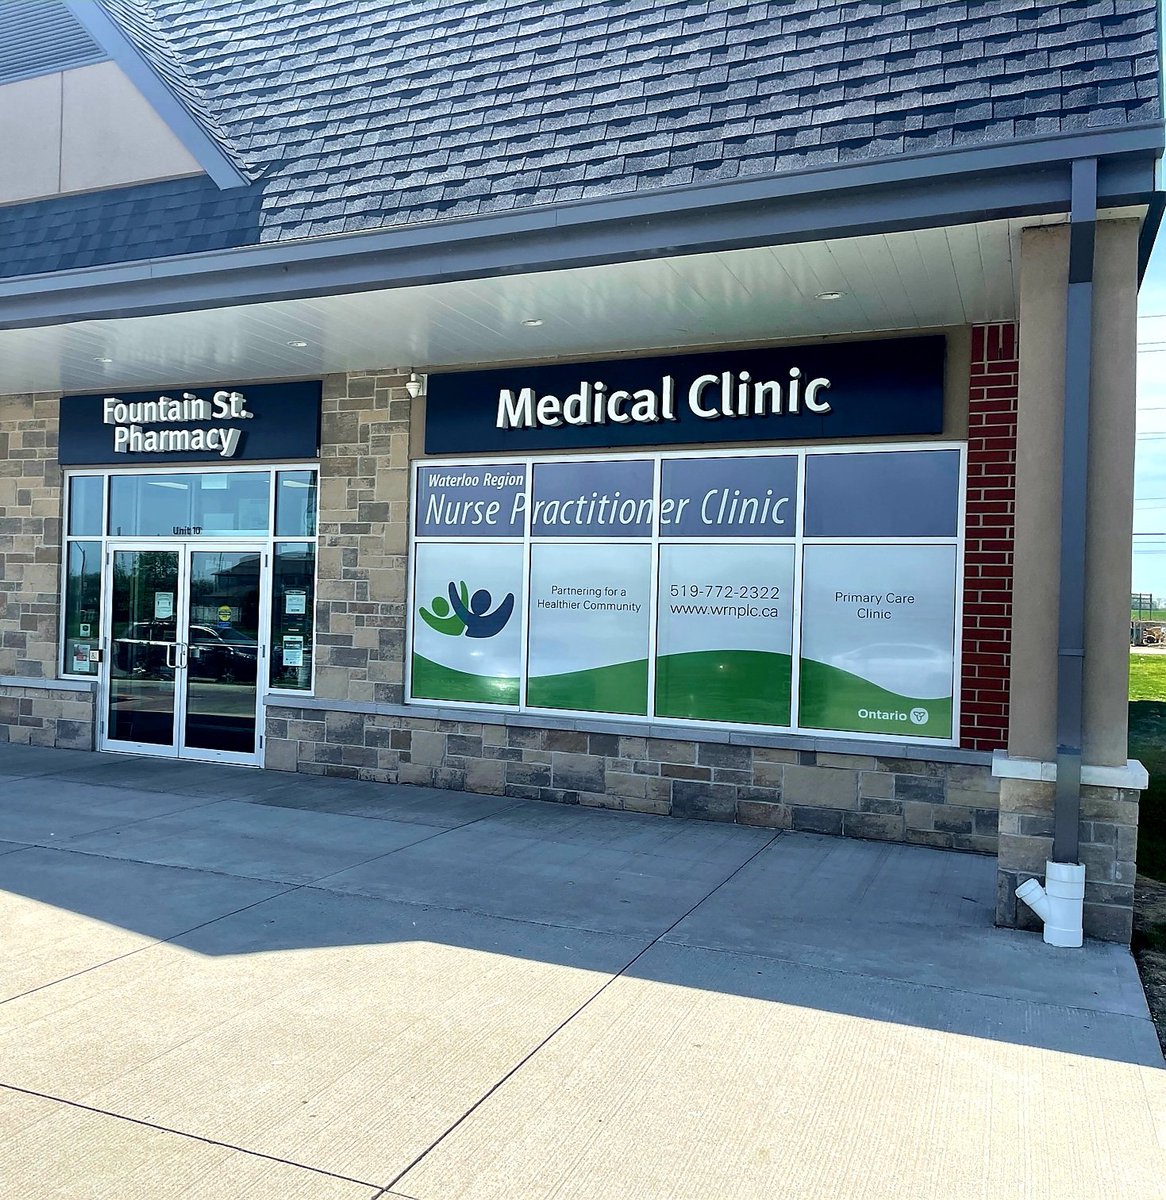 Tomorrow (June 1st) we open our THIRD site!!!! So excited to expand the NPLC model of Primary Care to the Breslau community.
wrnplc.ca
#NPLC #patientcentred #teambased
#primarycare